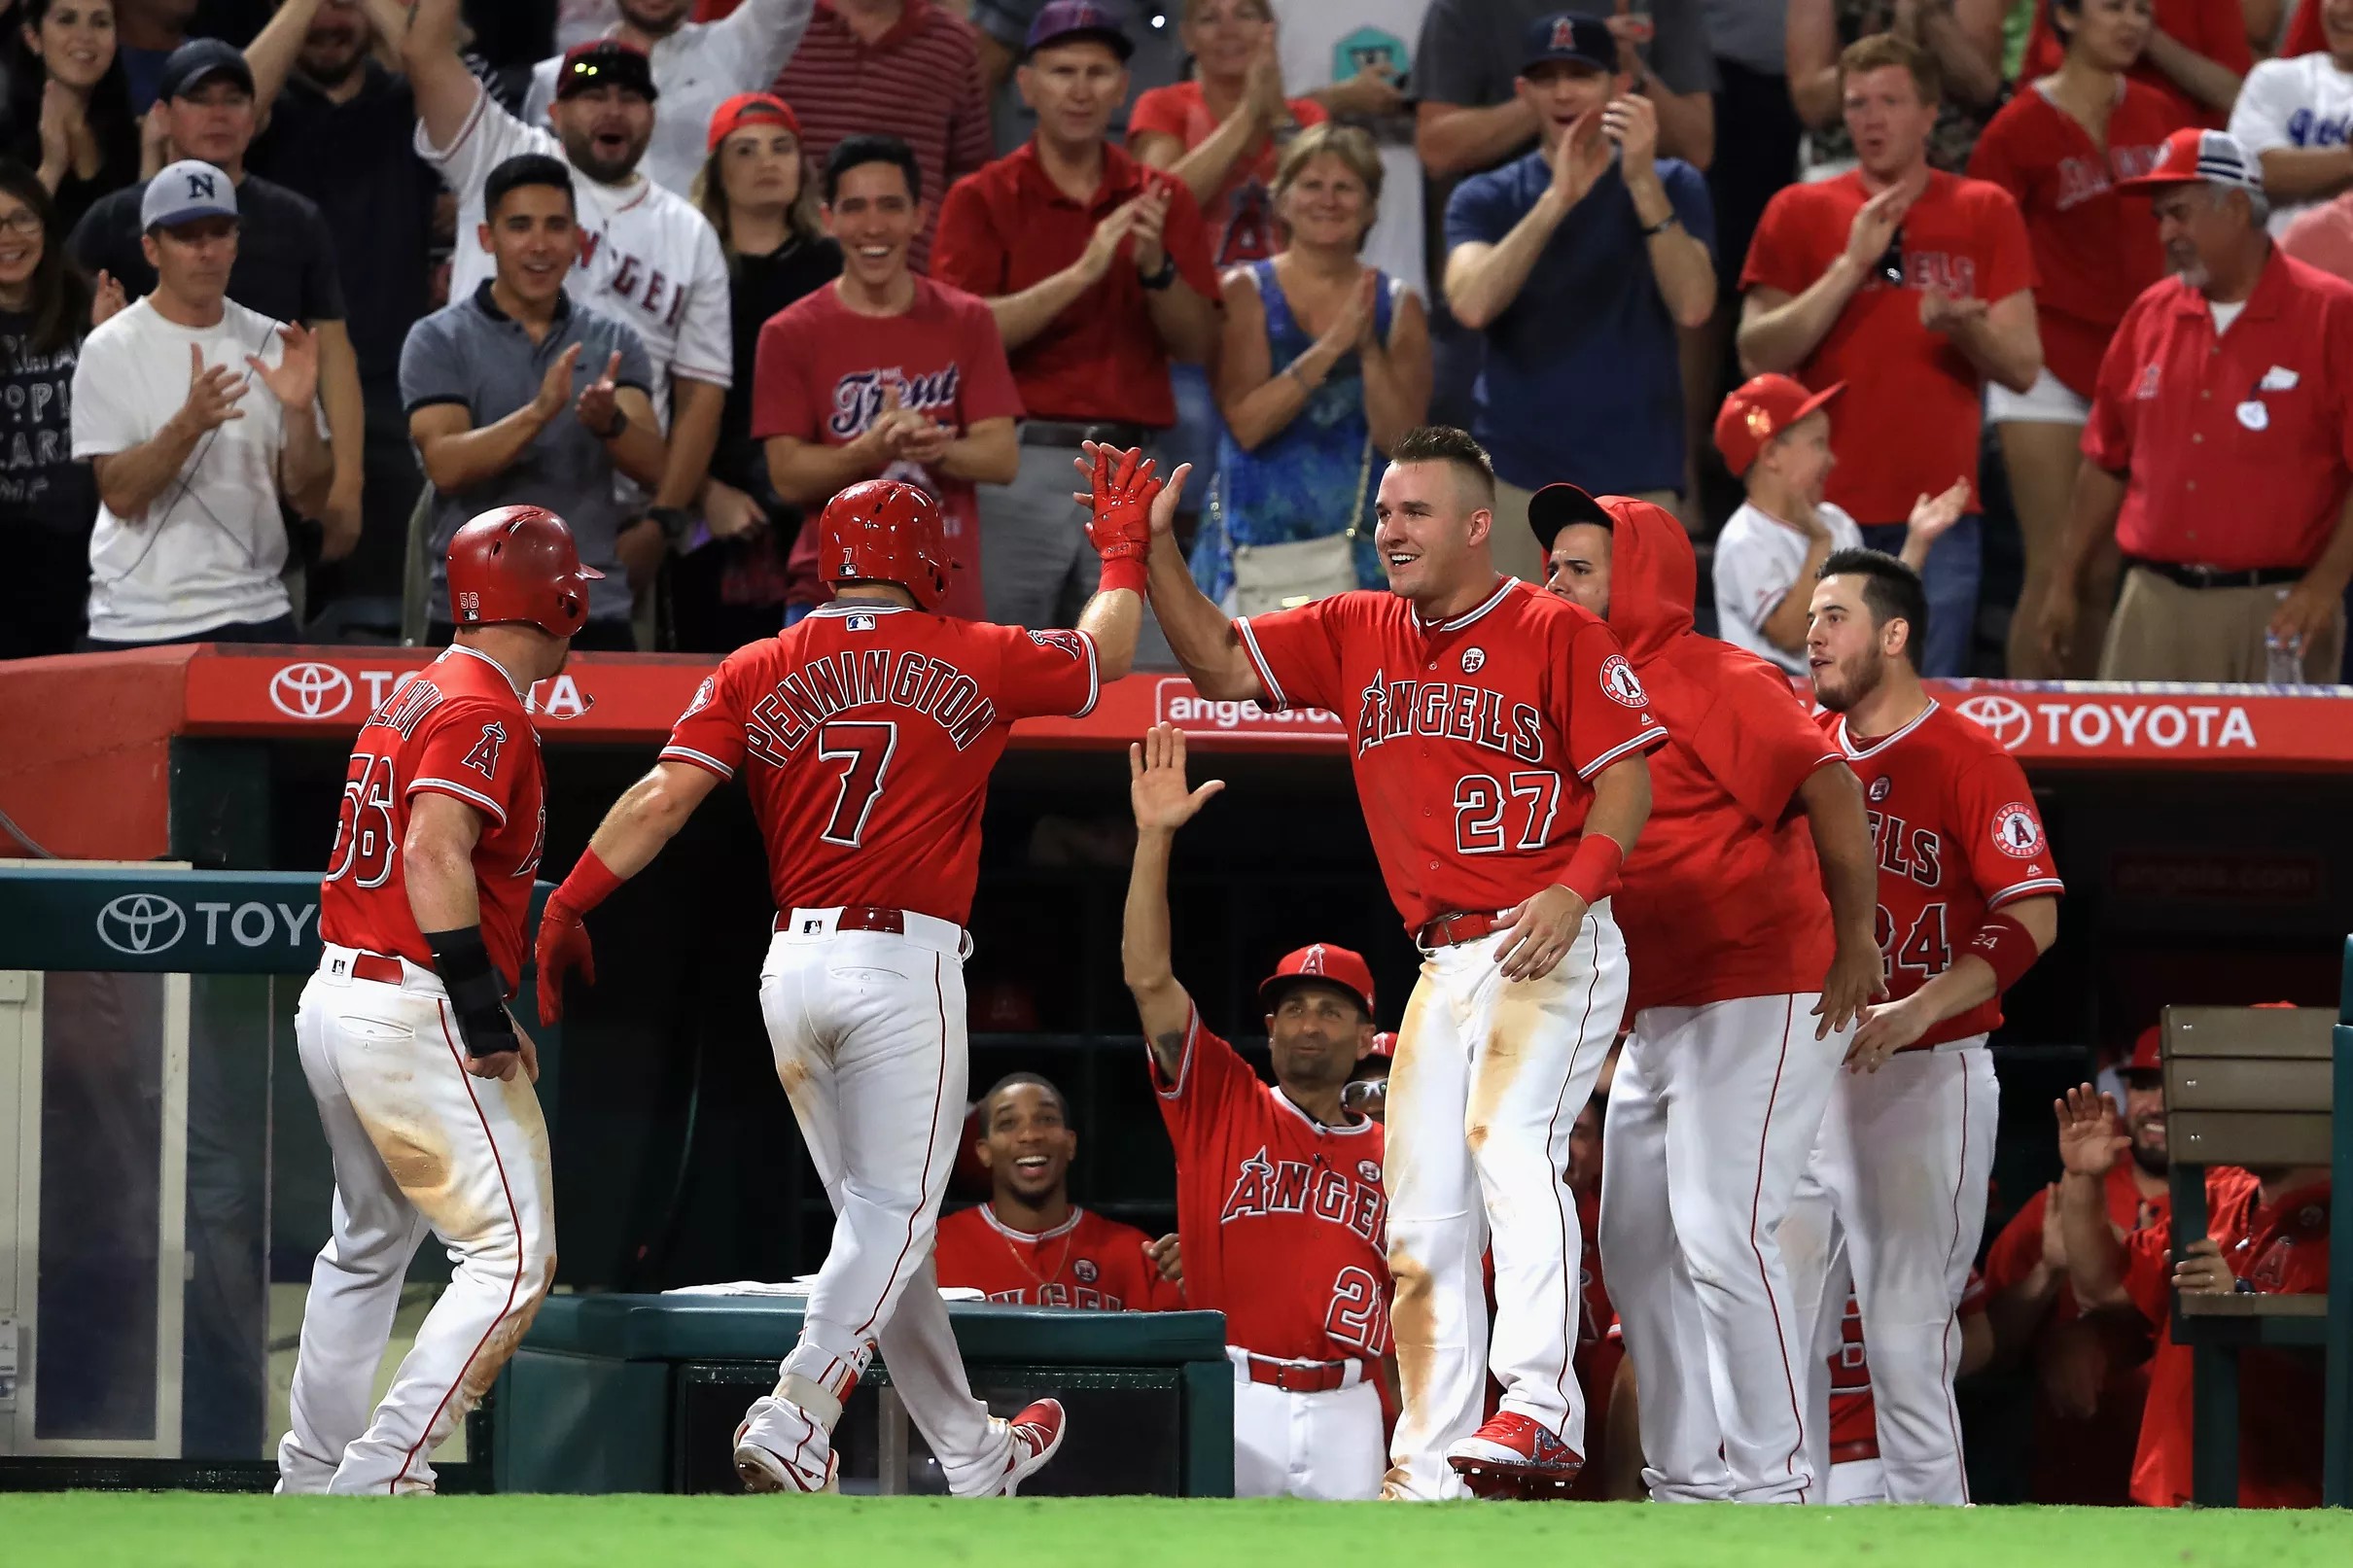 With yesterday’s big moves, Las Vegas suddenly likes the Angels odds of